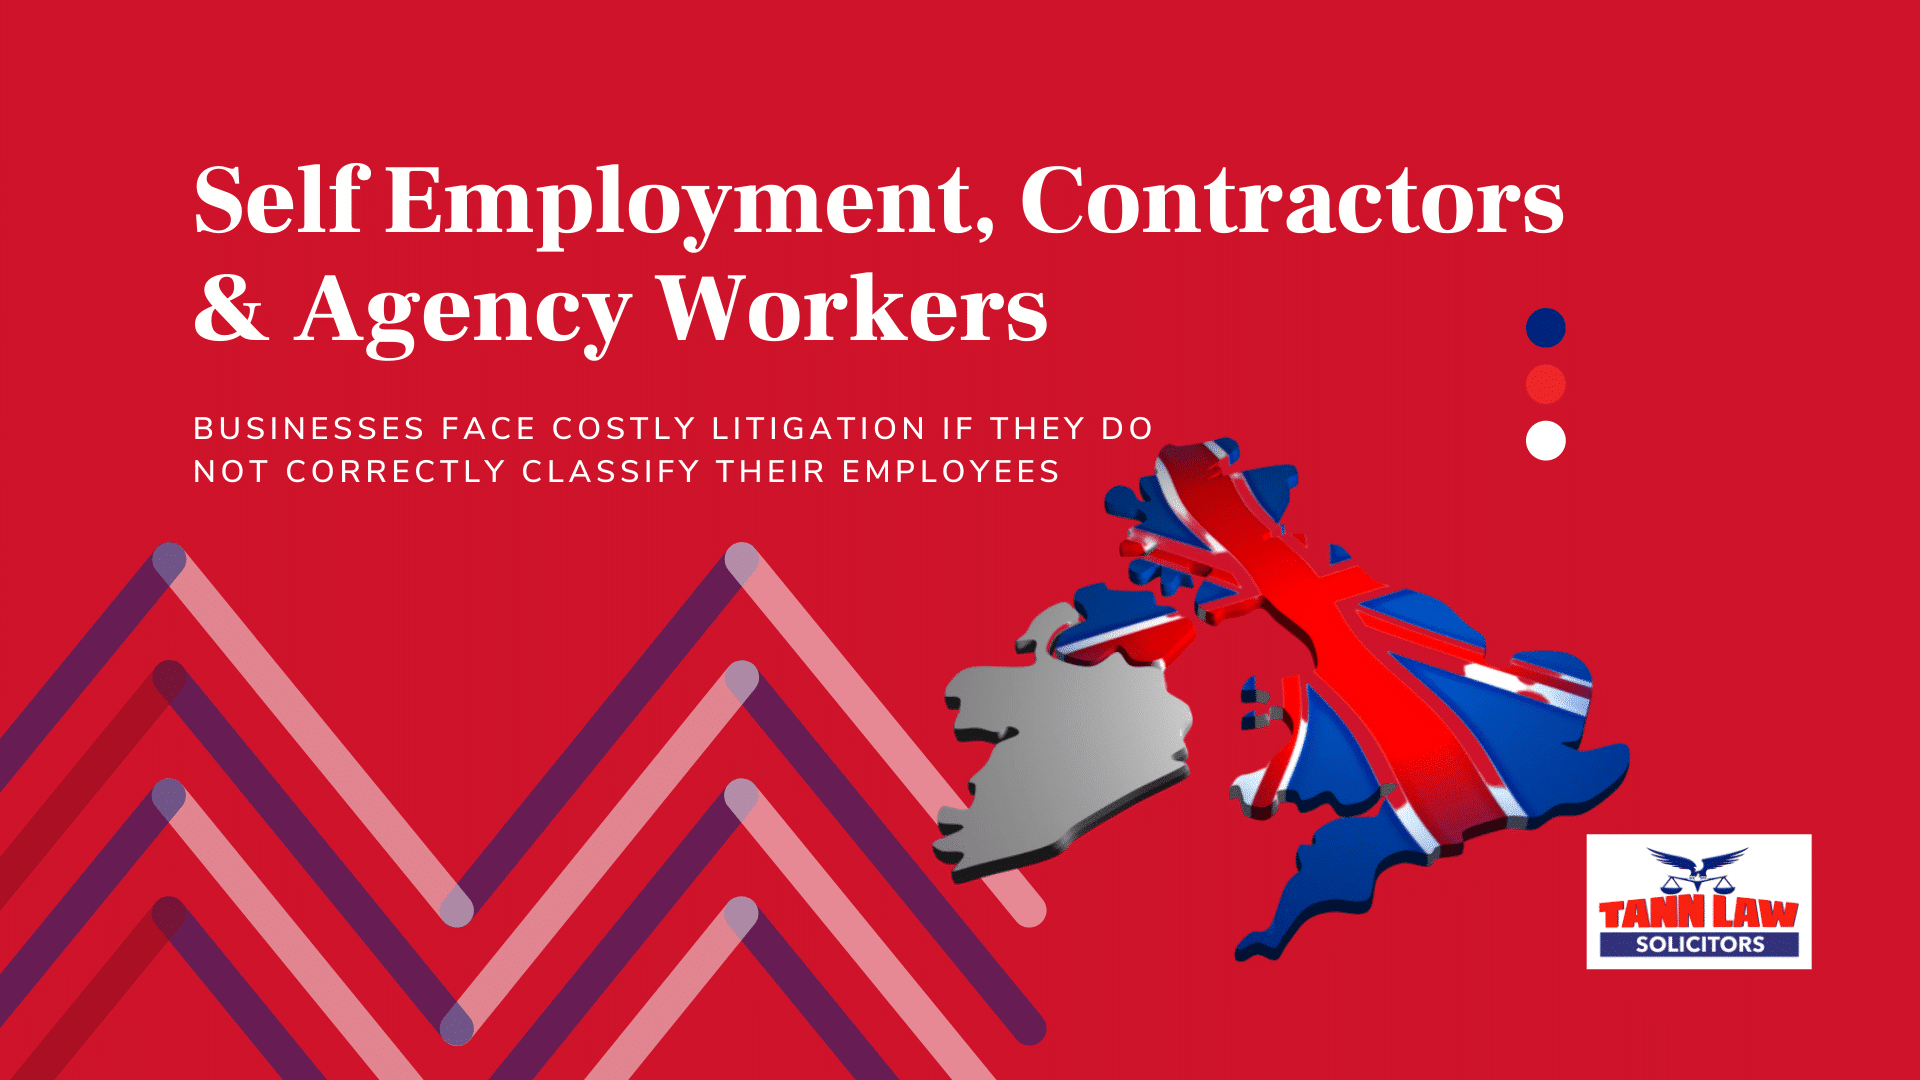 Self Employment, Contractors and Agency Workers - employment status